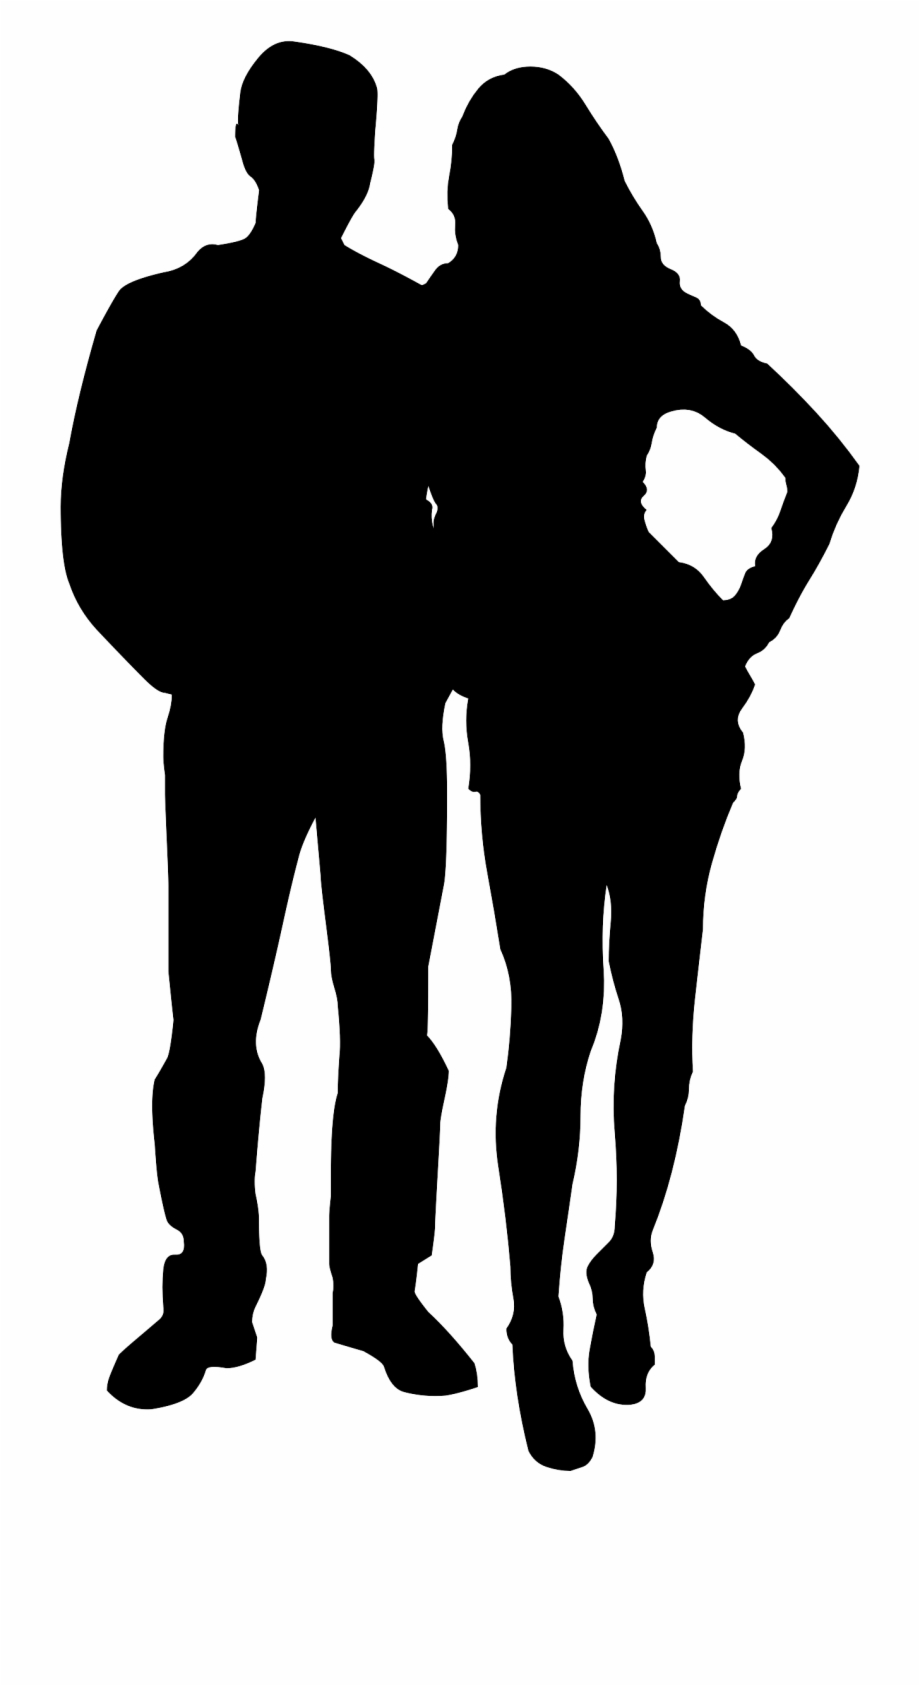 Couple Silhouette Love Relationship 1226163 Need Is A